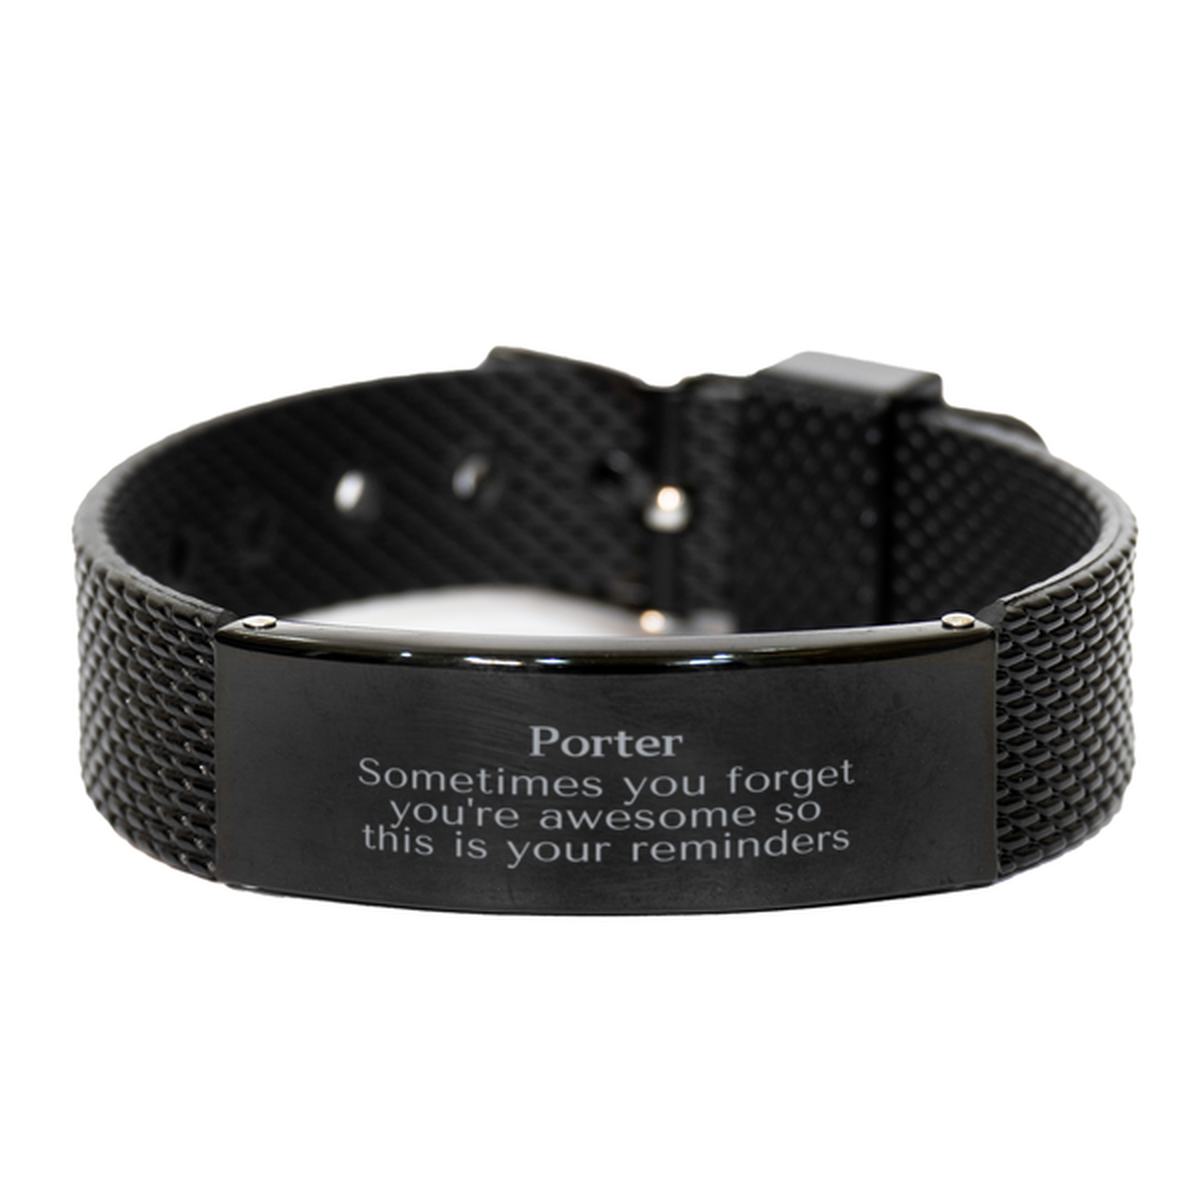 Sentimental Porter Black Shark Mesh Bracelet, Porter Sometimes you forget you're awesome so this is your reminders, Graduation Christmas Birthday Gifts for Porter, Men, Women, Coworkers